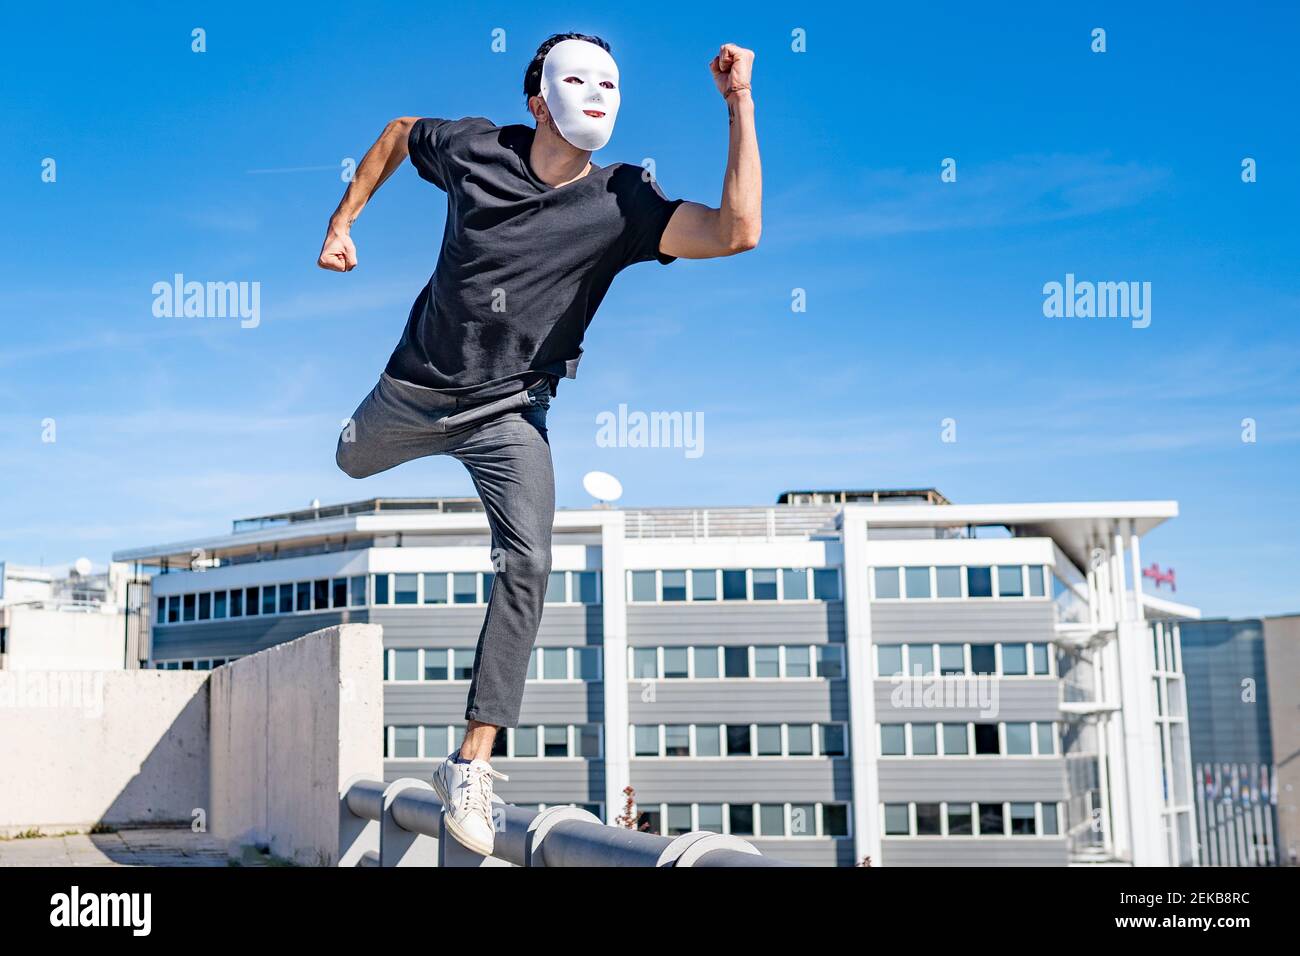 Young man wearing white mask running on rooftop during sunny day Stock Photo